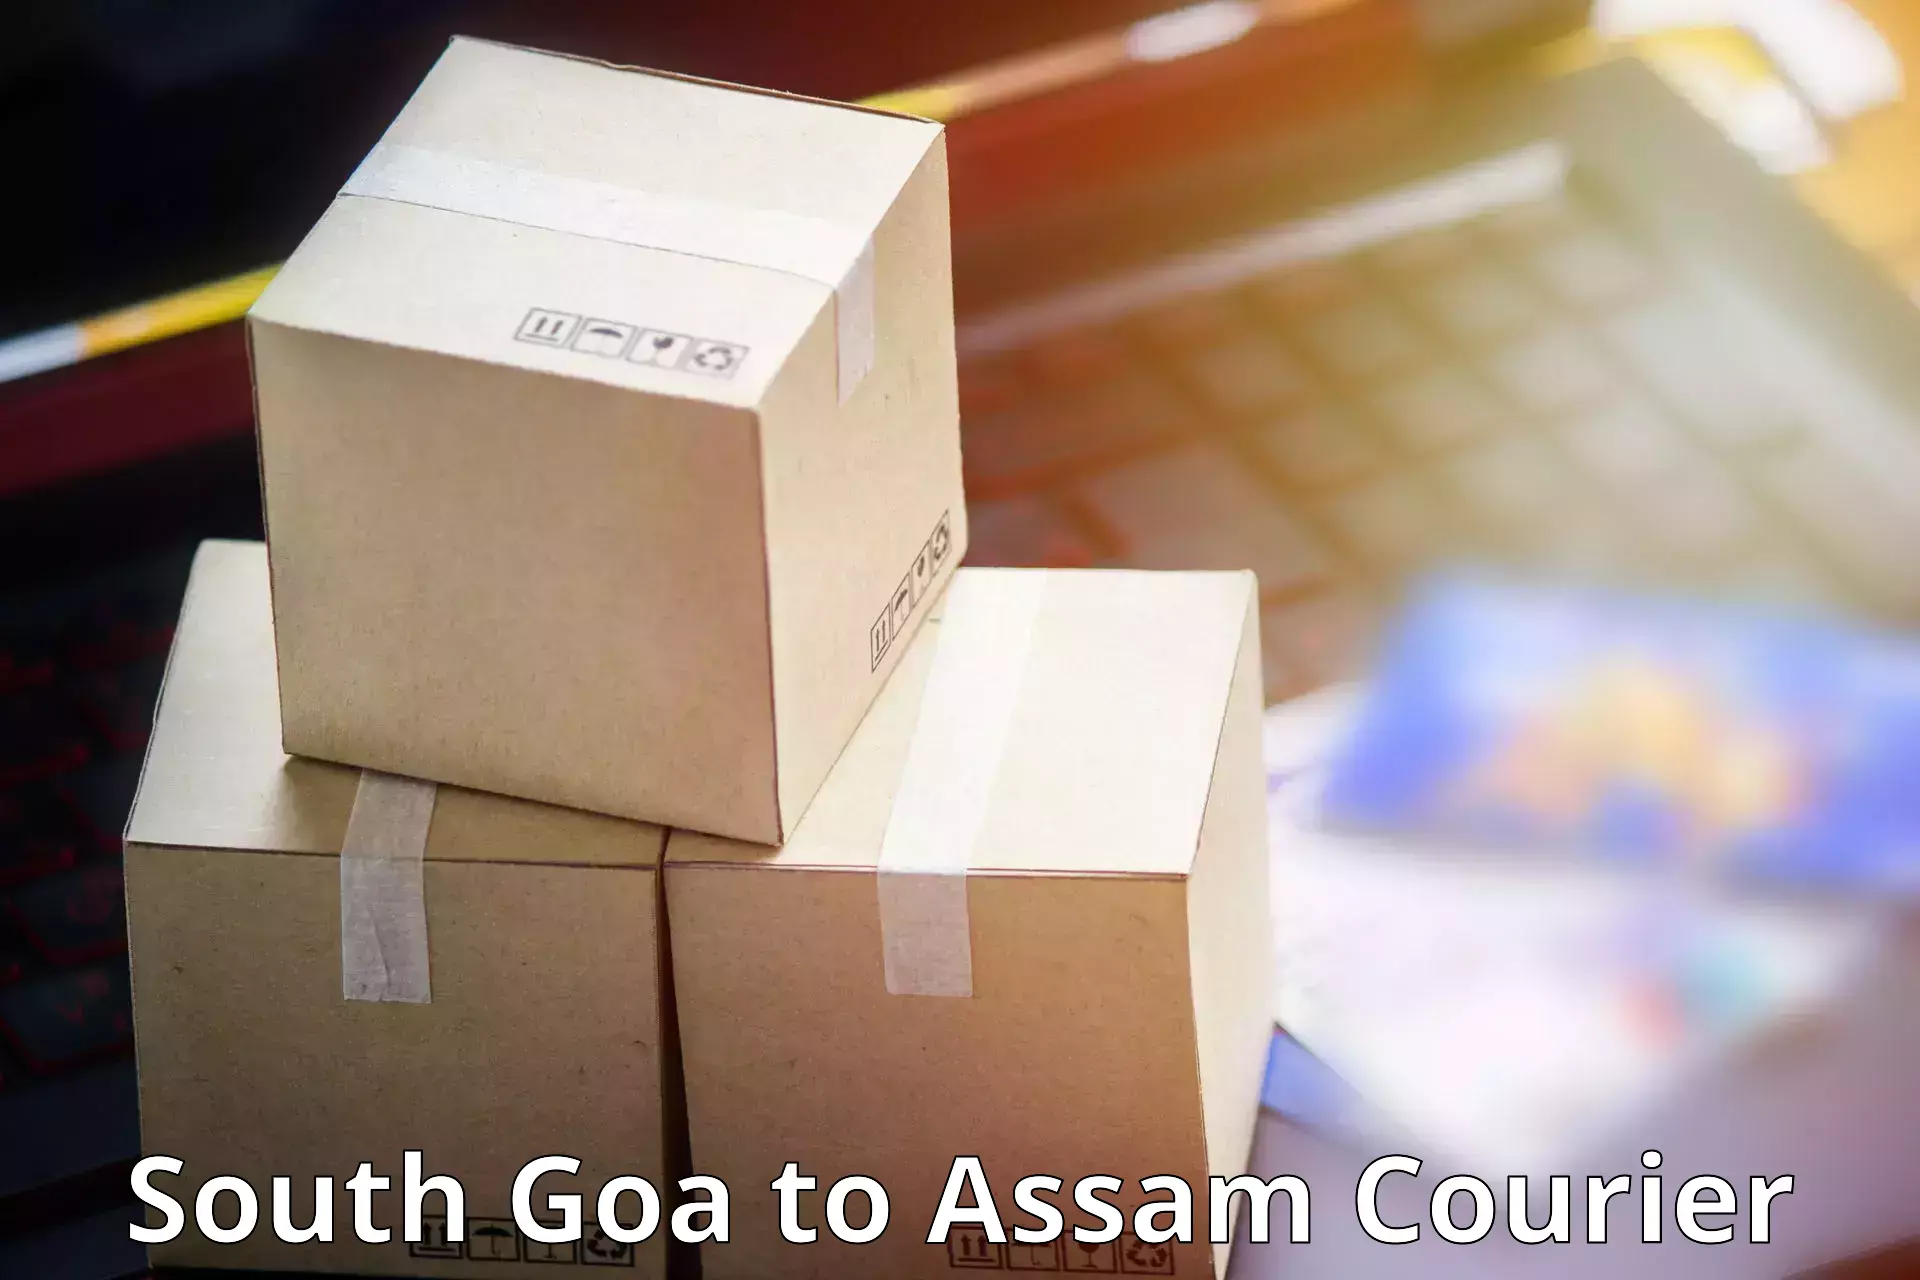 Courier services South Goa to Guwahati